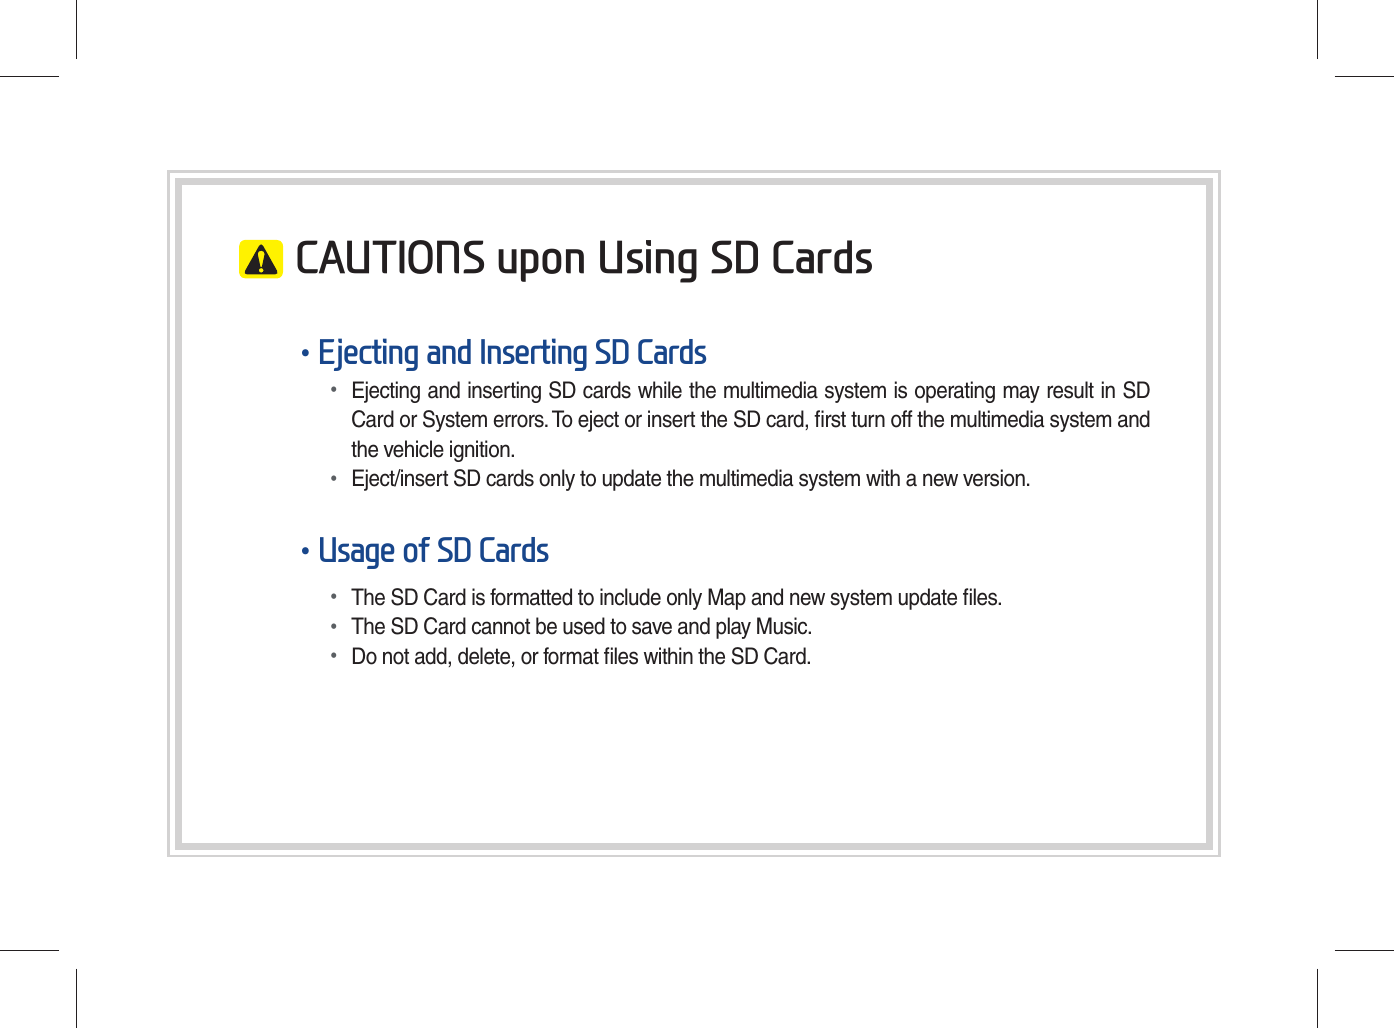 CAUTIONS upon Using SD Cards•Ejecting and Inserting SD Cards•Ejecting and inserting SD cards while the multimedia system is operating may result in SDCard or System errors. To eject or insert the SD card, ﬁ rst turn off the multimedia system andthe vehicle ignition.•Eject/insert SD cards only to update the multimedia system with a new version.•Usage of SD Cards•The SD Card is formatted to include only Map and new system update ﬁ les.•The SD Card cannot be used to save and play Music.•Do not add, delete, or format ﬁ les within the SD Card.